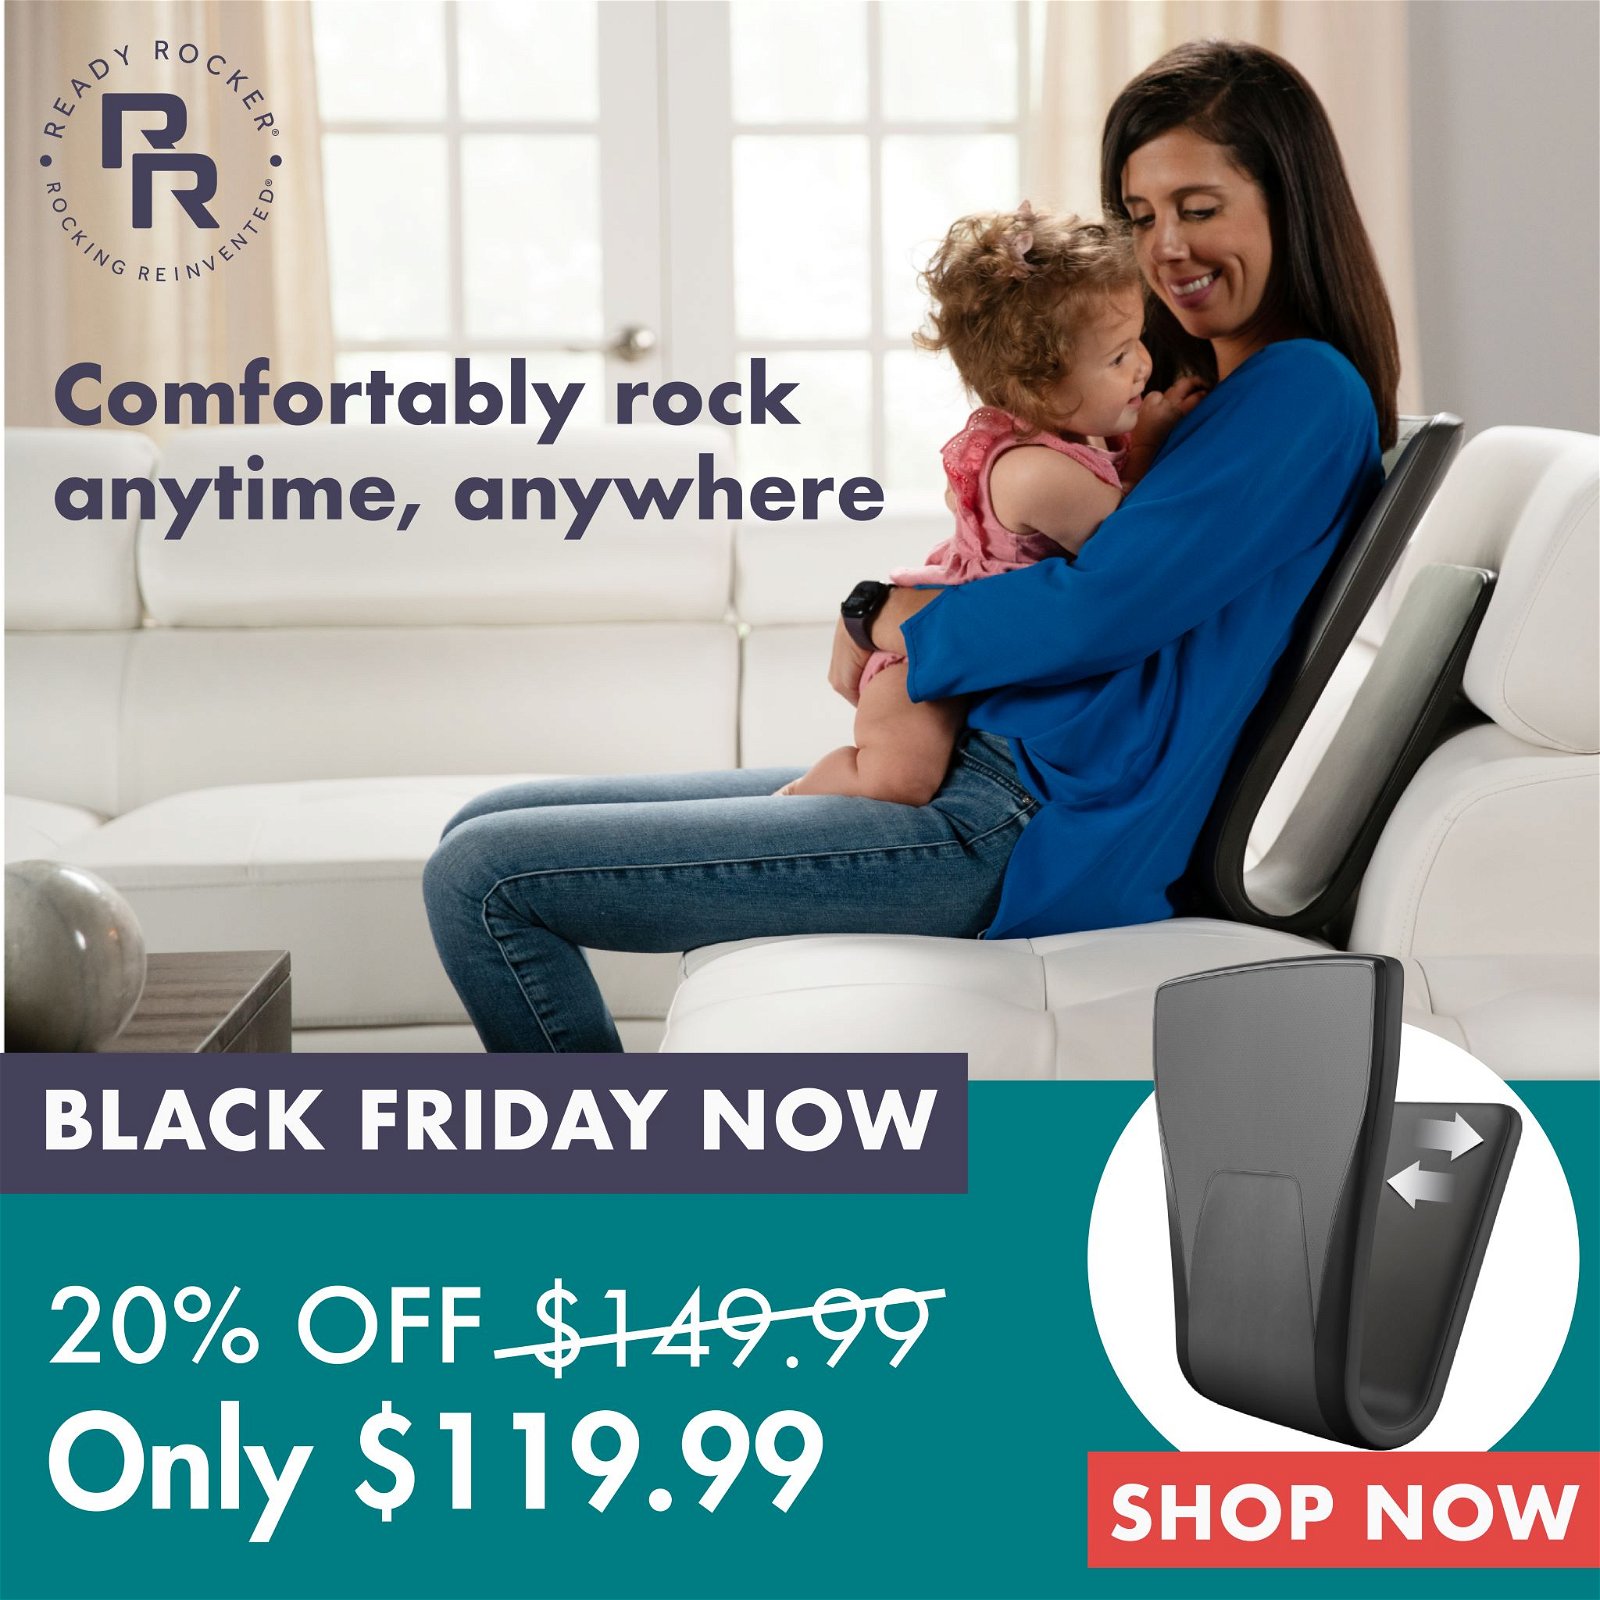 Black Friday Savings | 20% Off | Now Only $119.99